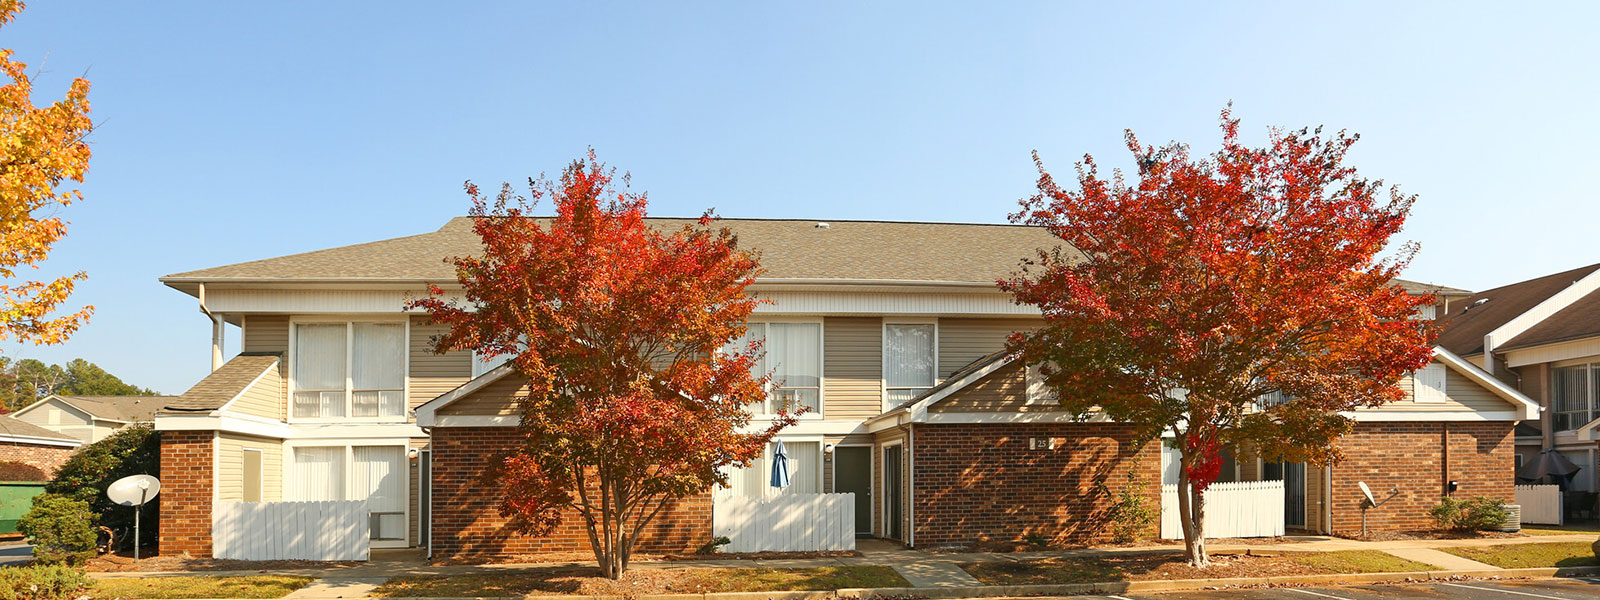 Richland Terrace Apartments in Columbia, SC